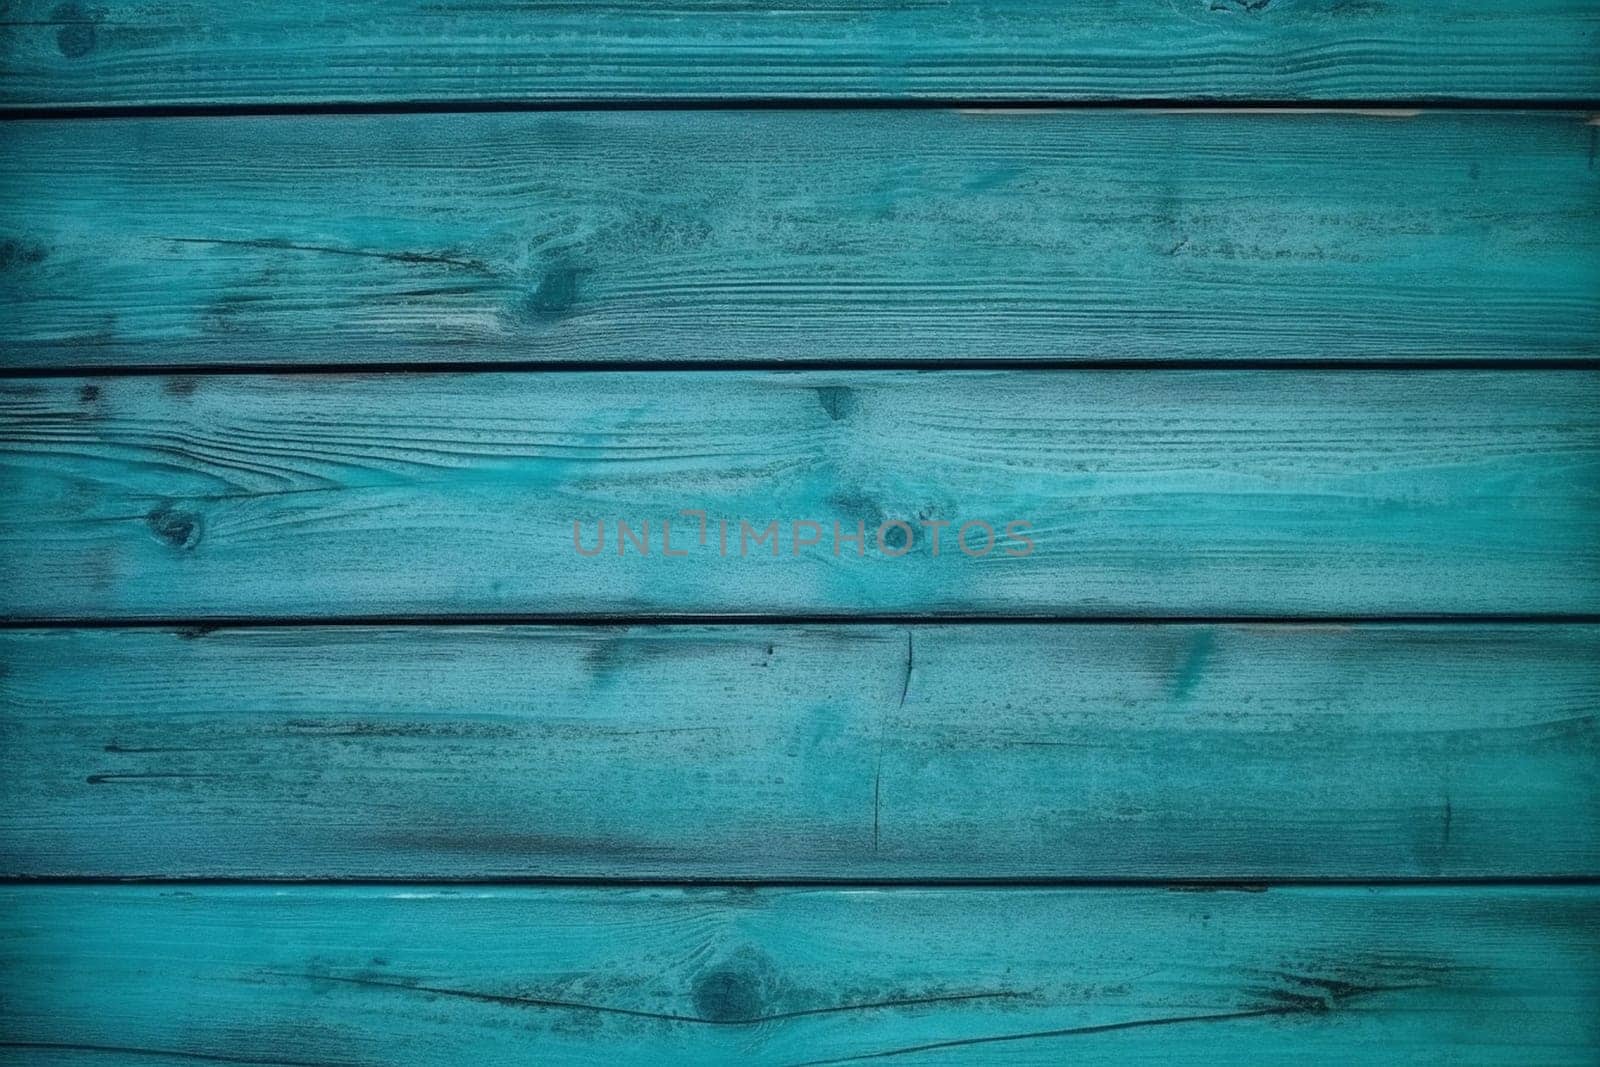 Blue Aqua color. Treated wooden boards - wood decking flooring and wood deck with paneled walls. Textures and patterns of natural wood. Background for interiors by Costin